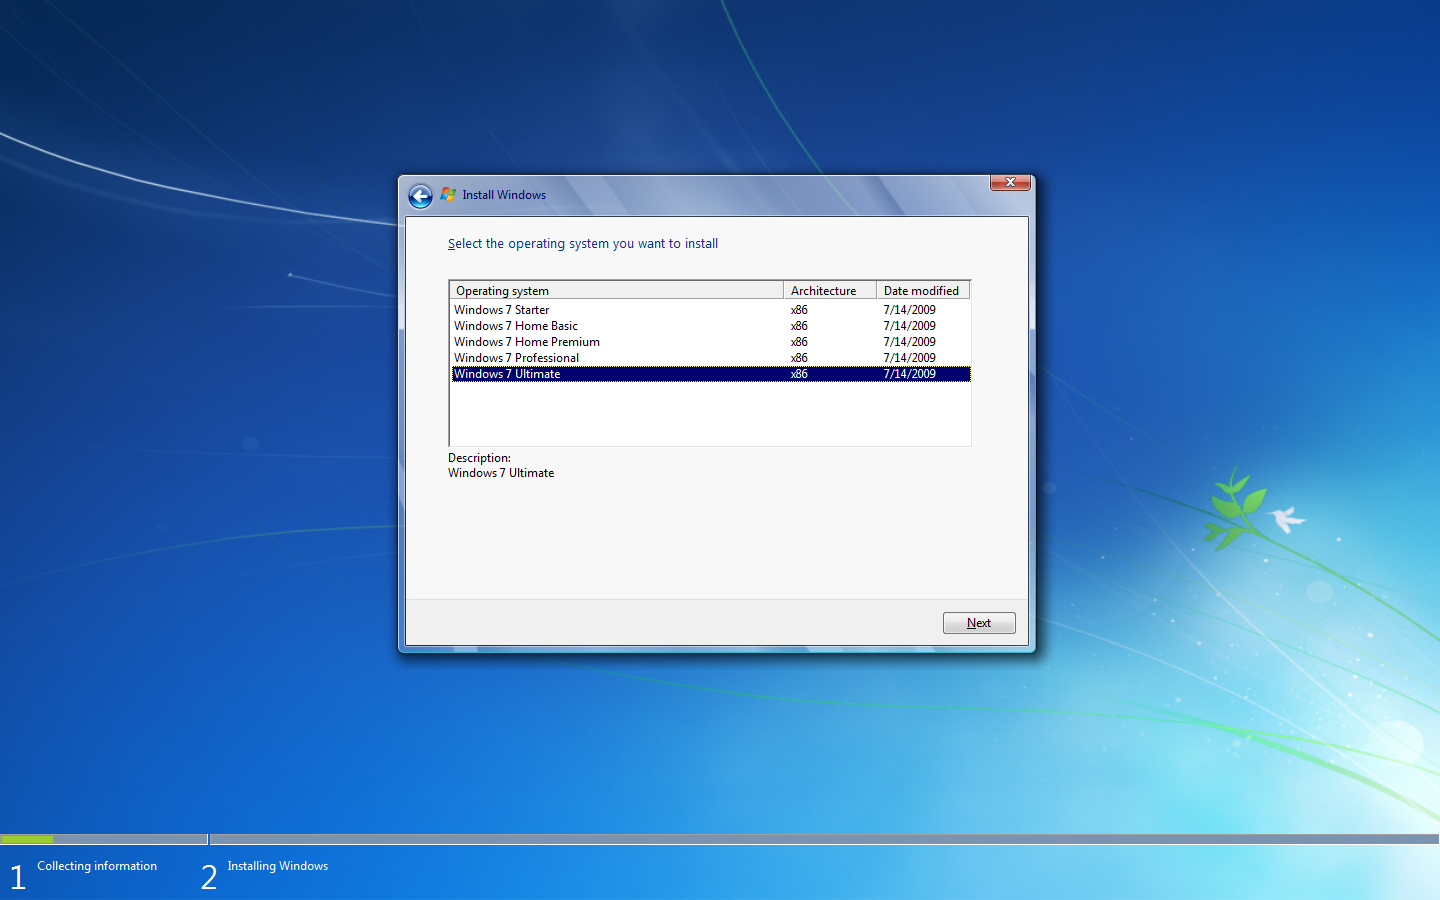 windows loader 2.2 2 by daz unsupported partition table